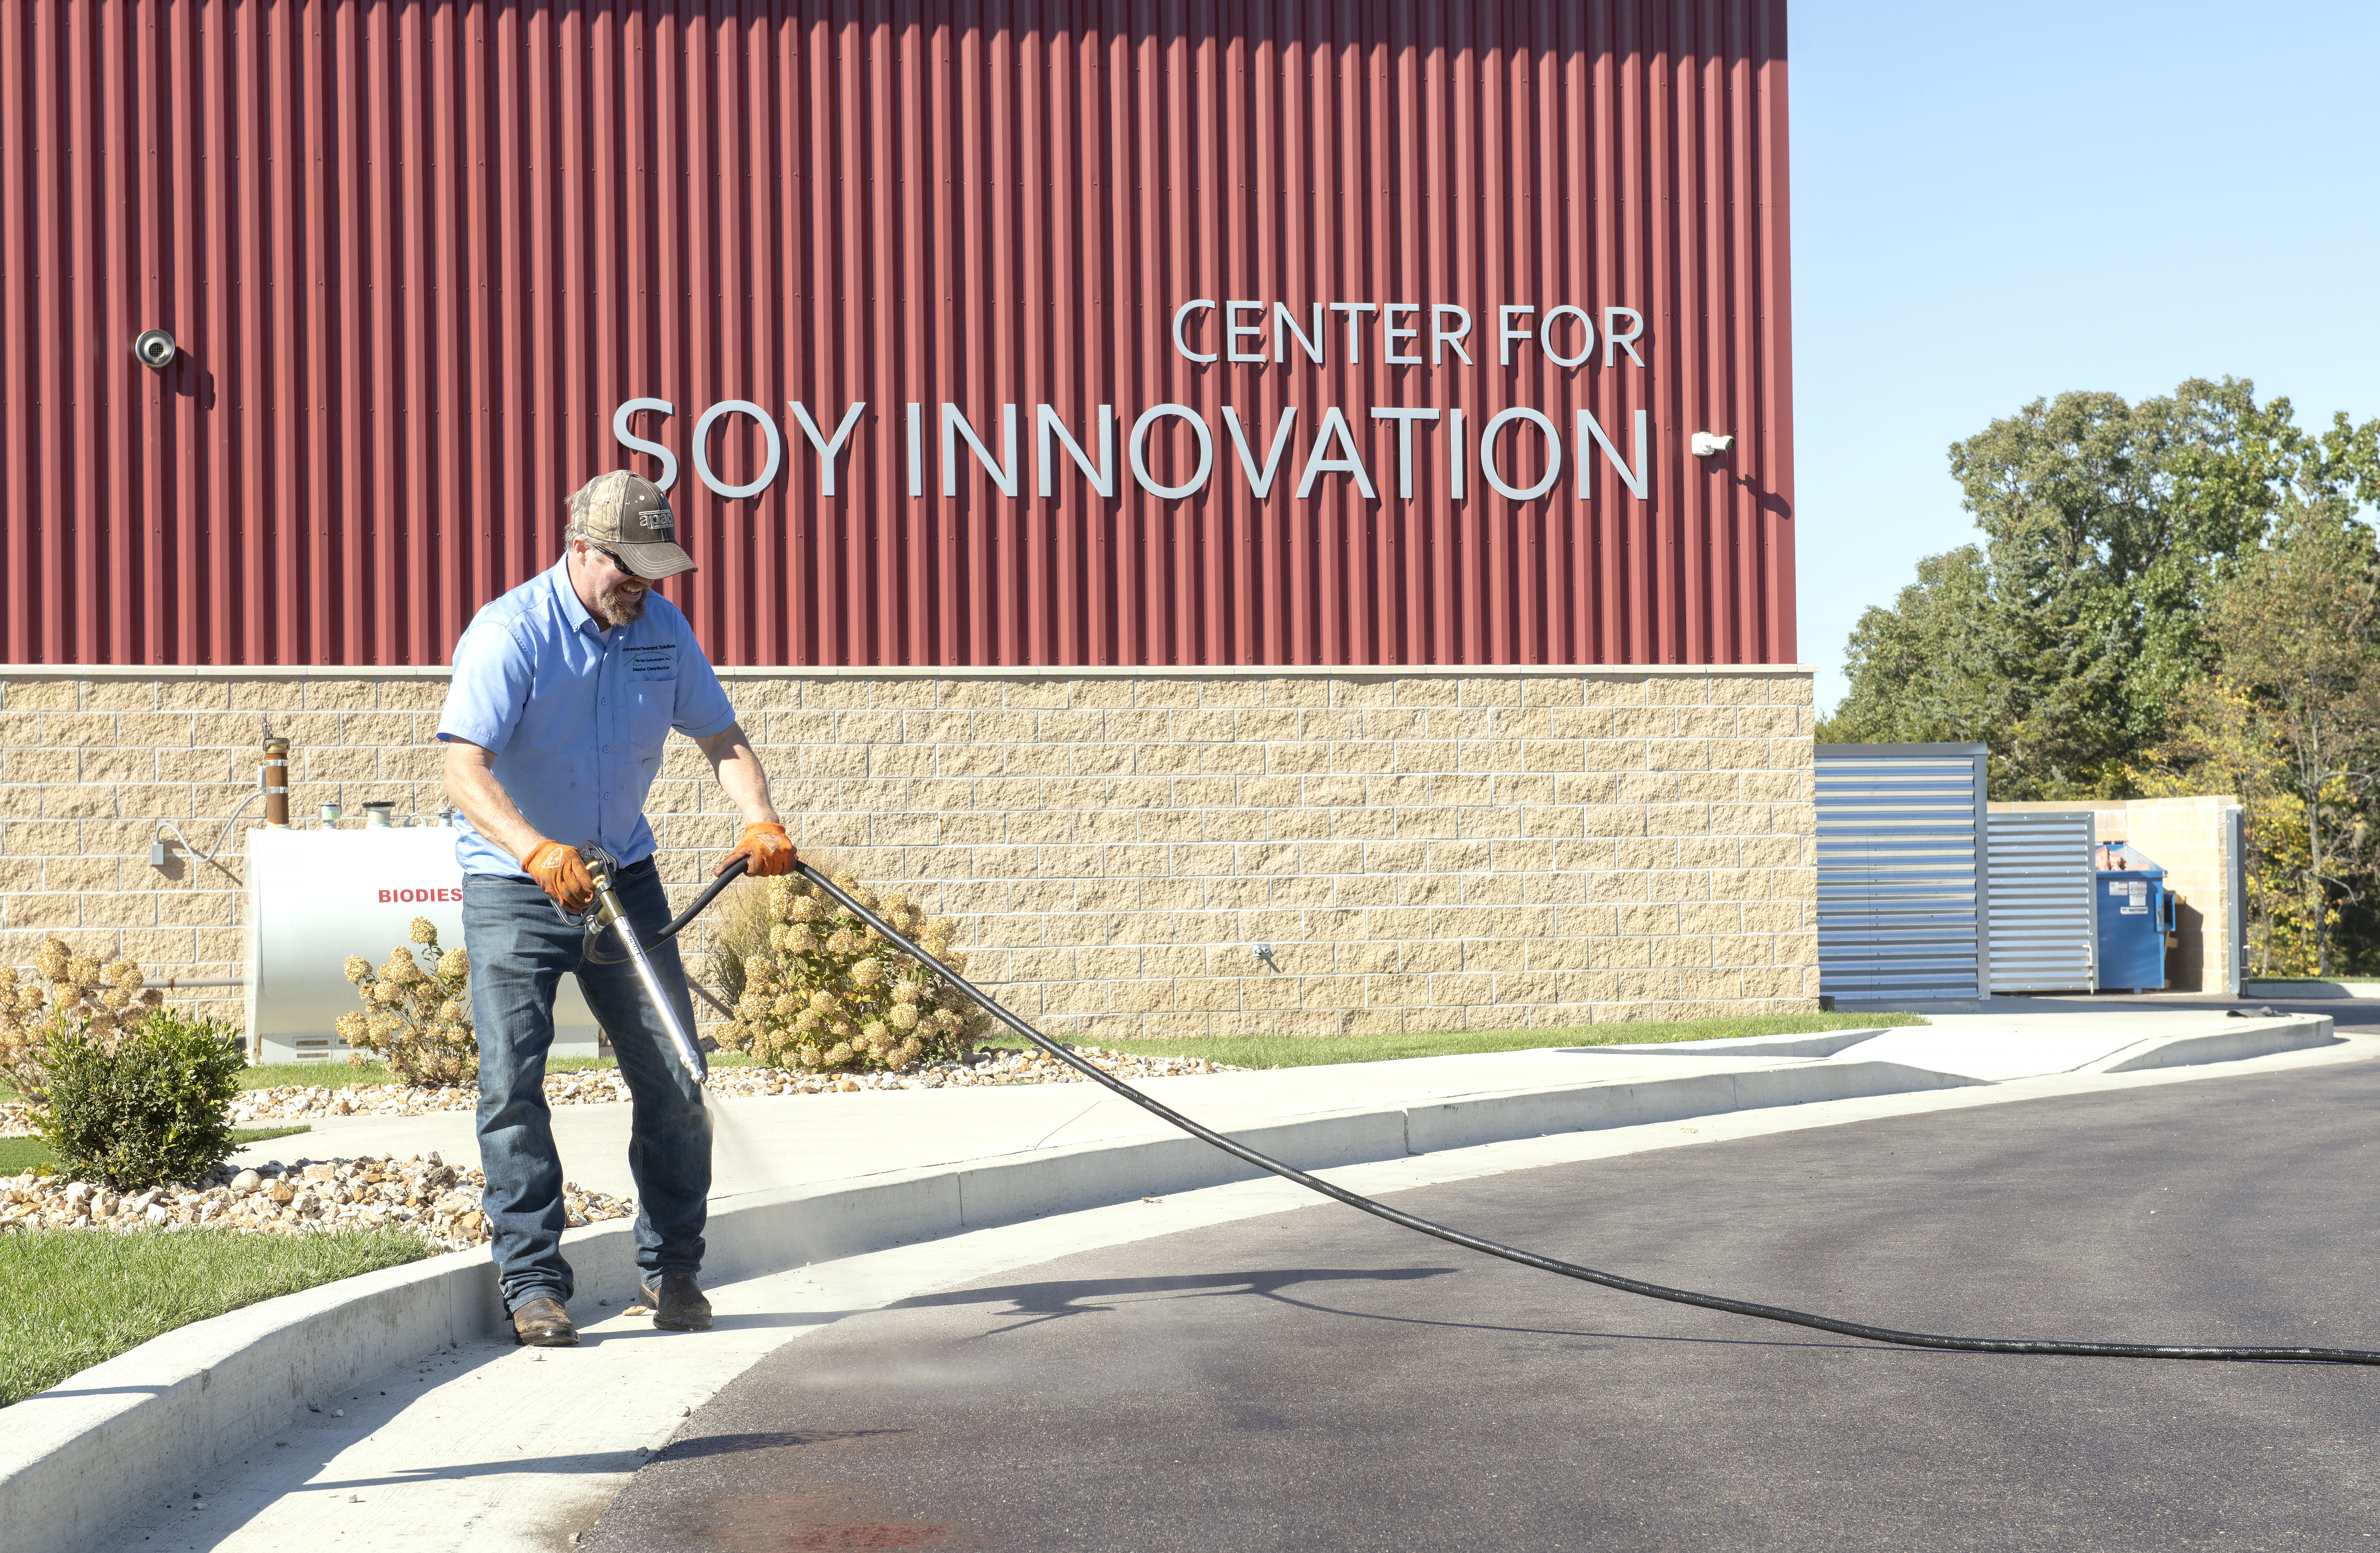 A man applying RePlay is an agricultural oil seal and preservation agent to the asphalt in front of the Center for Soy Innovation Building